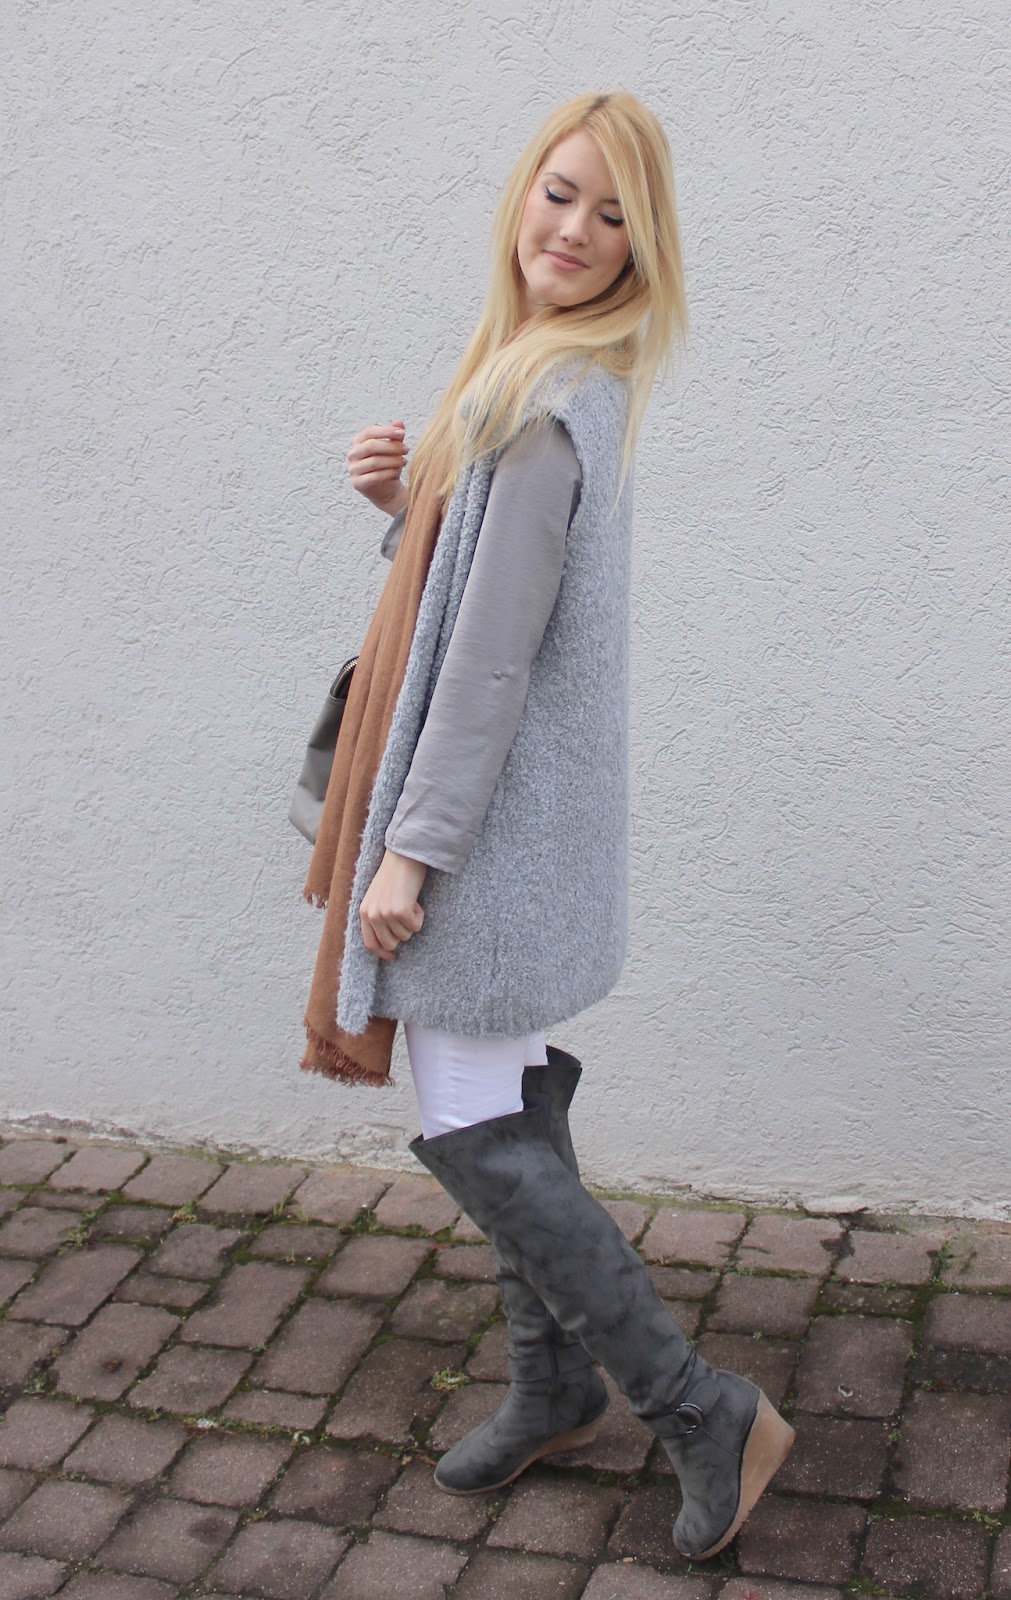 TheBlondeLion Outfit Beige Grau Neutral Shades Overknees http://theblondelion.blogspot.com/2015/02/how-to-style-10-neutral-shades.html